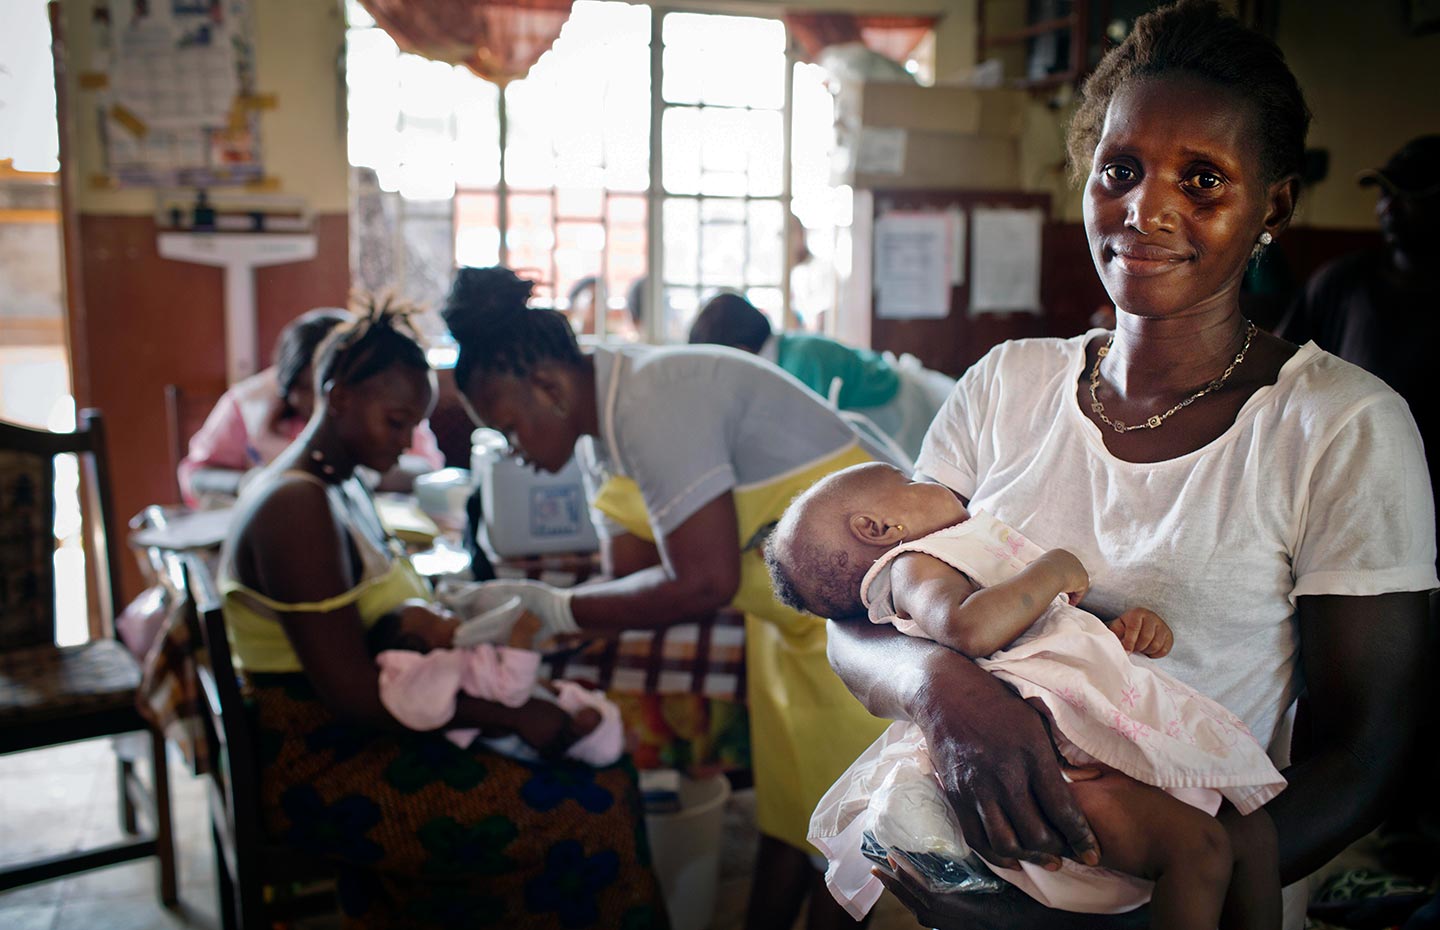 A woman waits with her daughter to be vaccinated at a maternal and child health clinic in a health centre in Freetown, Sierra, Leone on 17 February 2016. Gavi/2016/Kate Holt/Sierra Leone